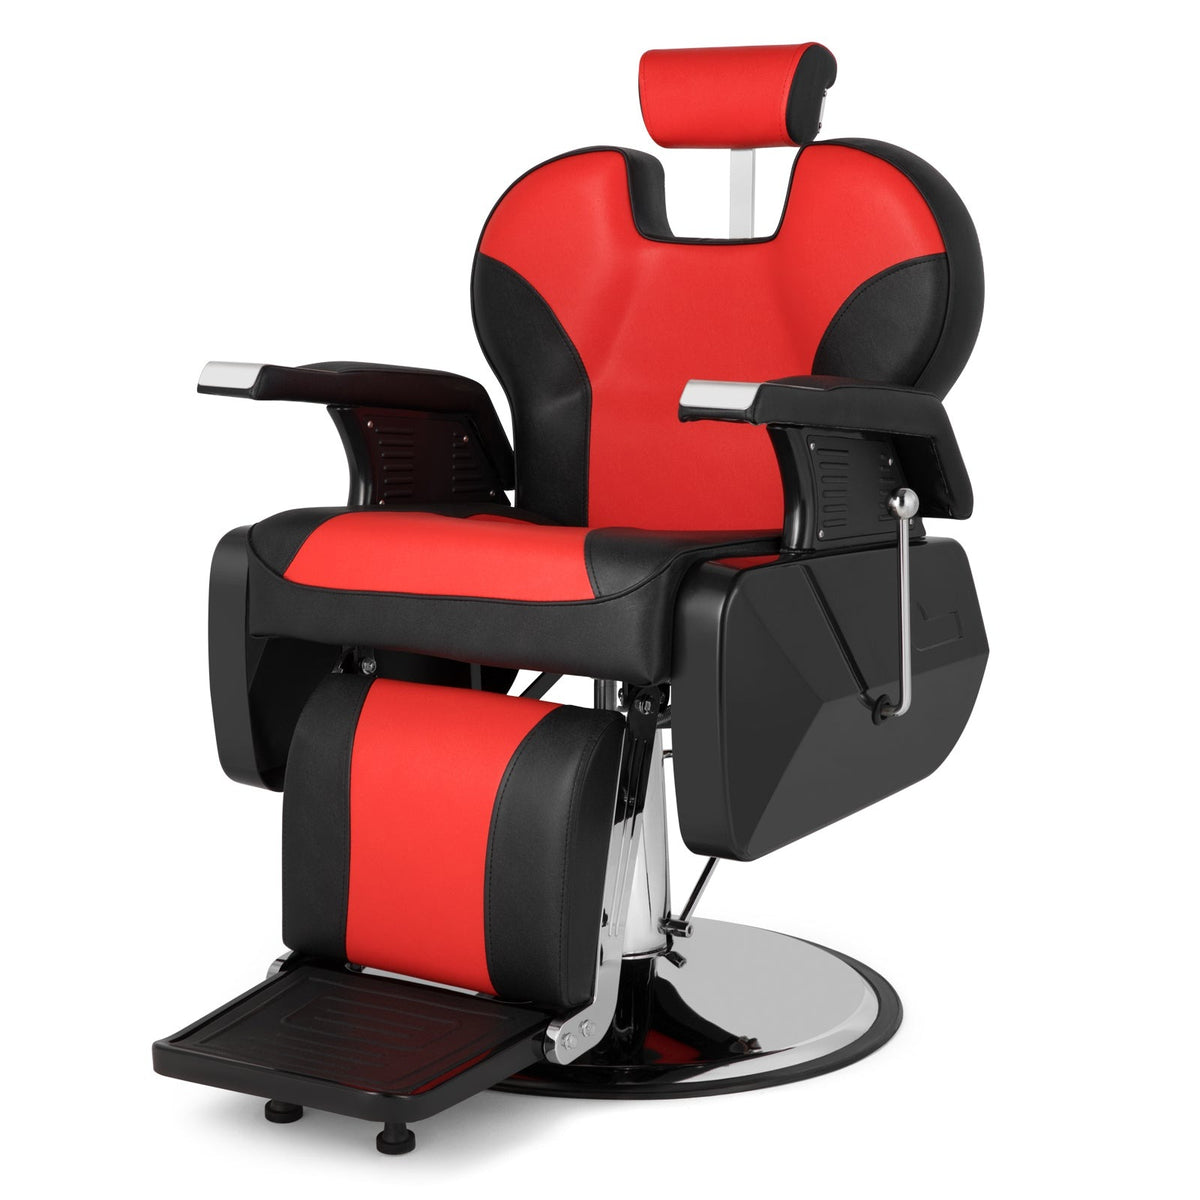 OmySalon BC1202 Classical Style Heavy Duty Hydraulic Reclining Barber Chair Black/Red/Black & Red/Brown